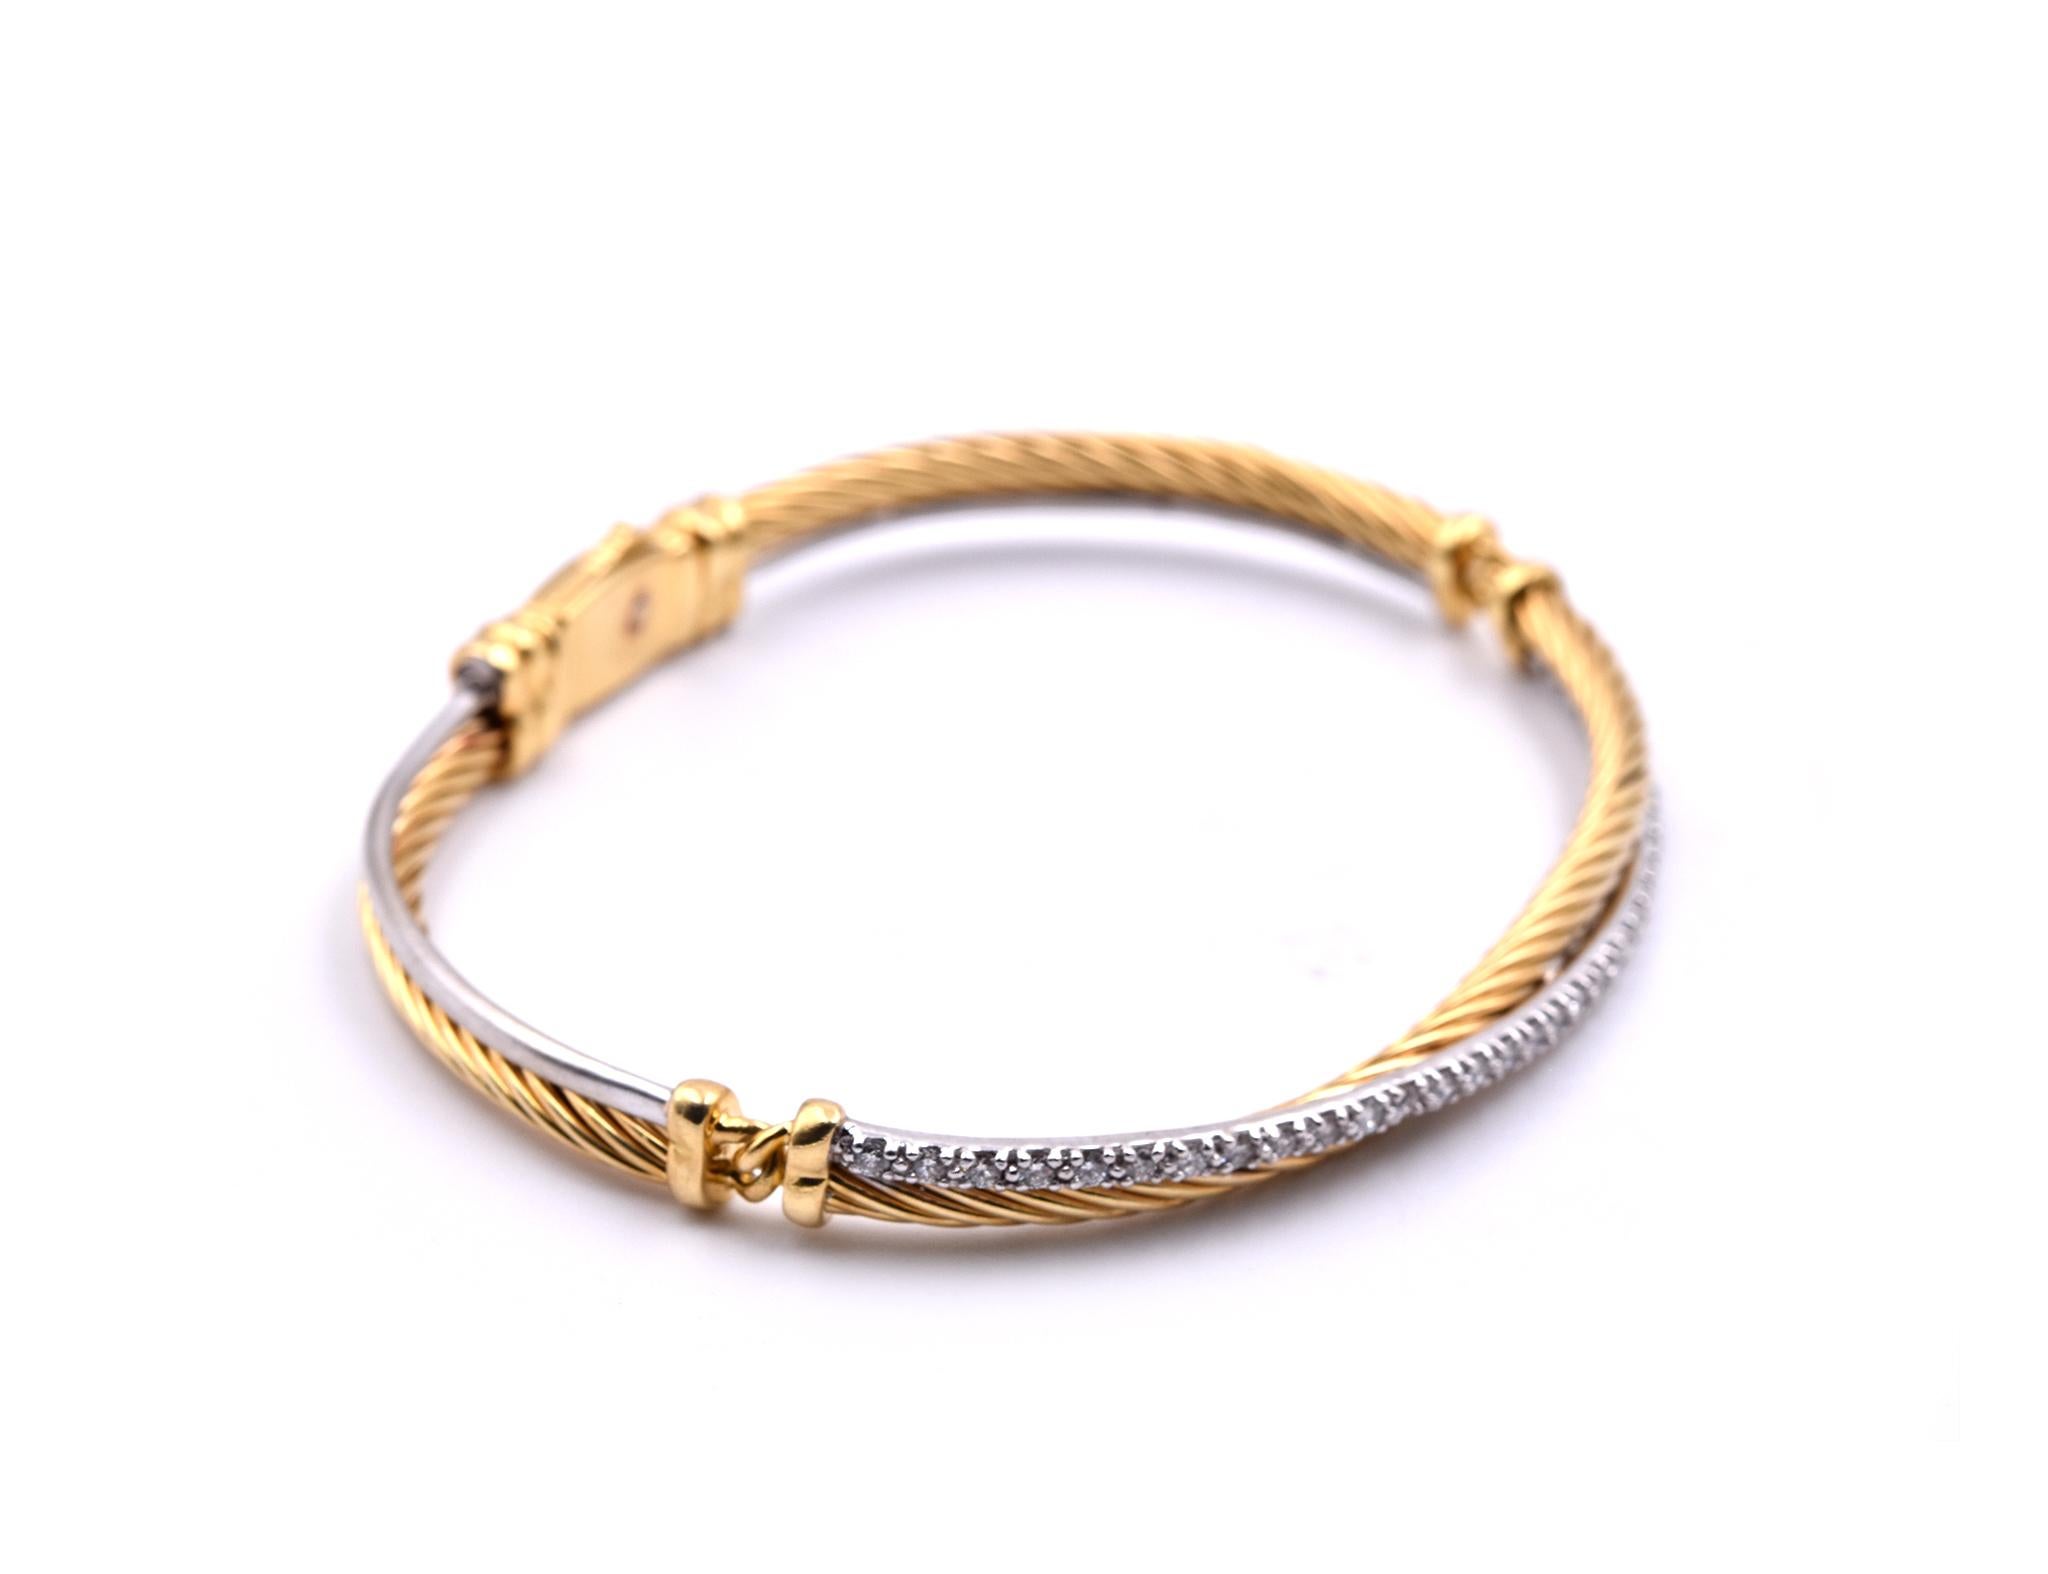 Designer: David Yurman
Material: 18k white & yellow gold
Diamonds: 33 round brilliant cut=.50cttw
Color: G
Clarity: VS
Dimensions: bracelet will fit a 6 ½ -inch wrist
Weight: 16.21 grams
